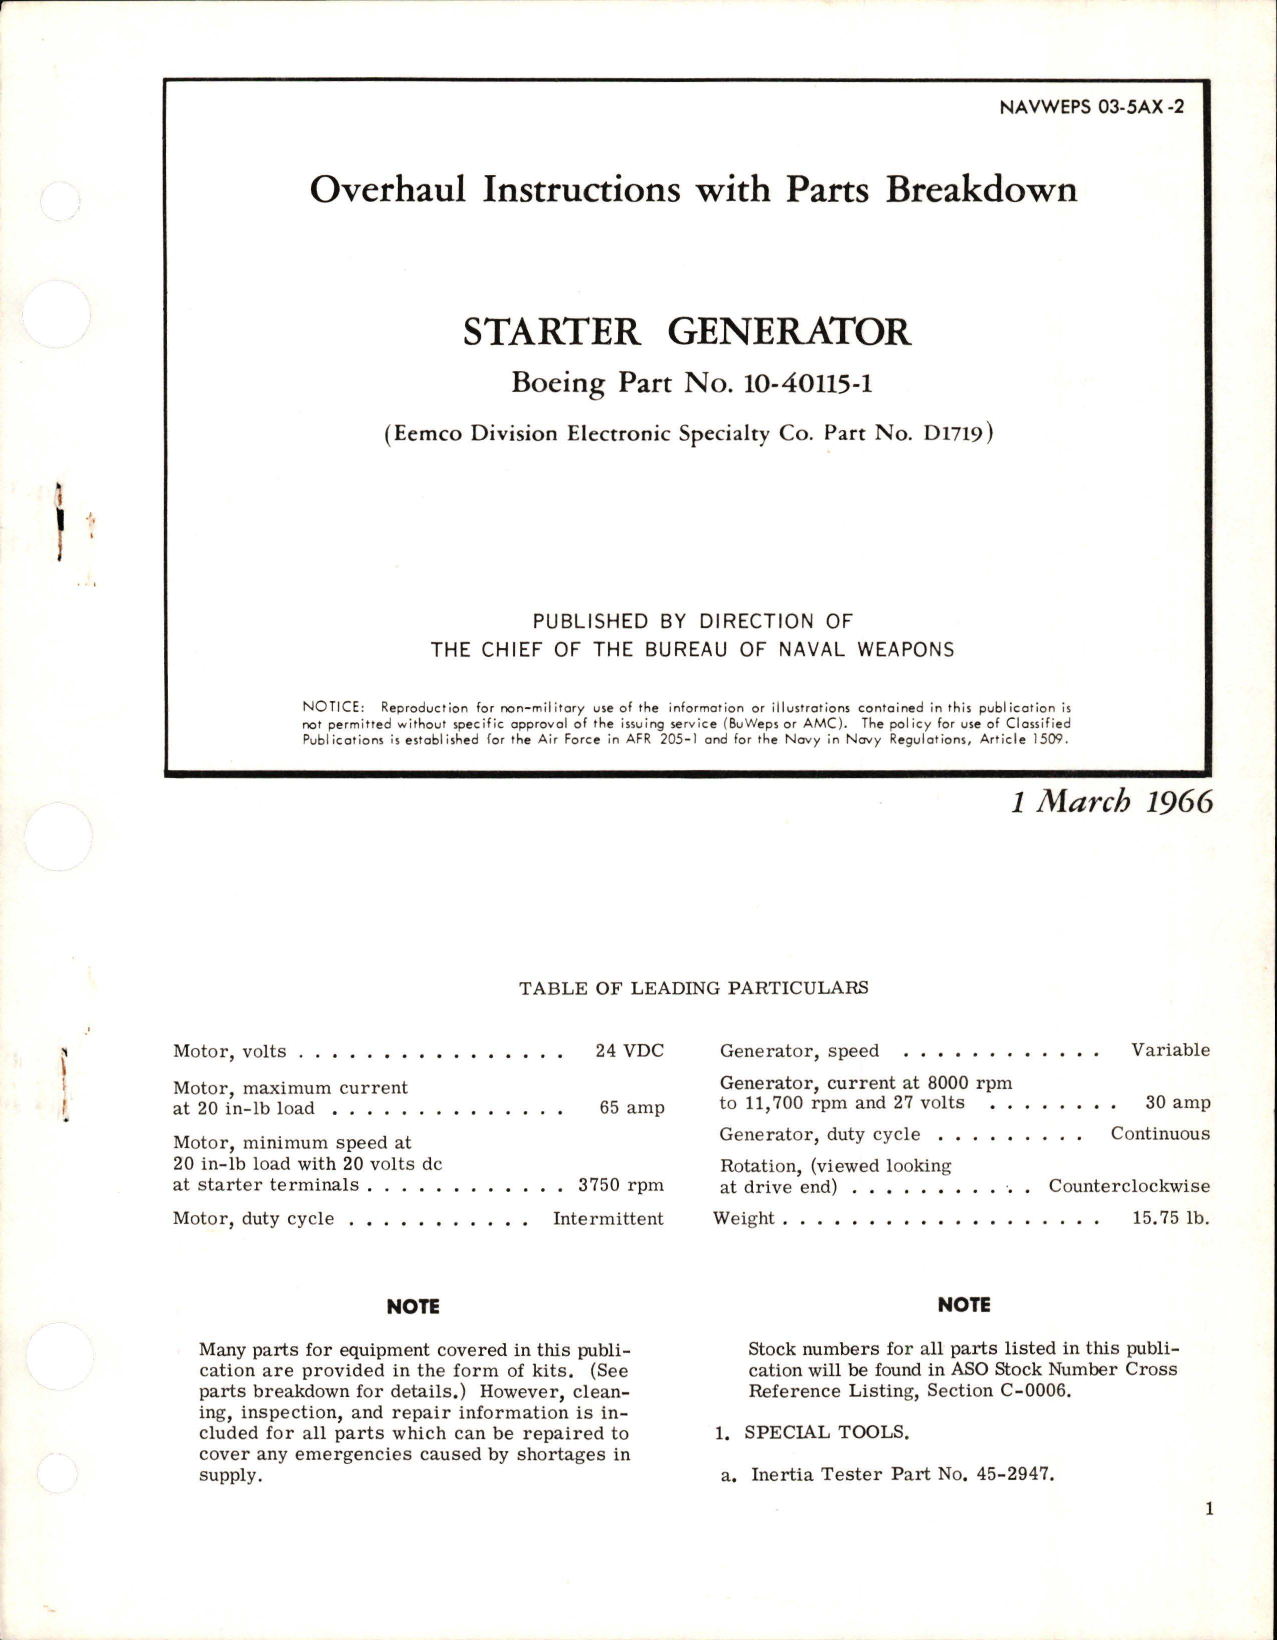 Sample page 1 from AirCorps Library document: Overhaul Instructions with Parts Breakdown for Starter Generator  - Part D1719